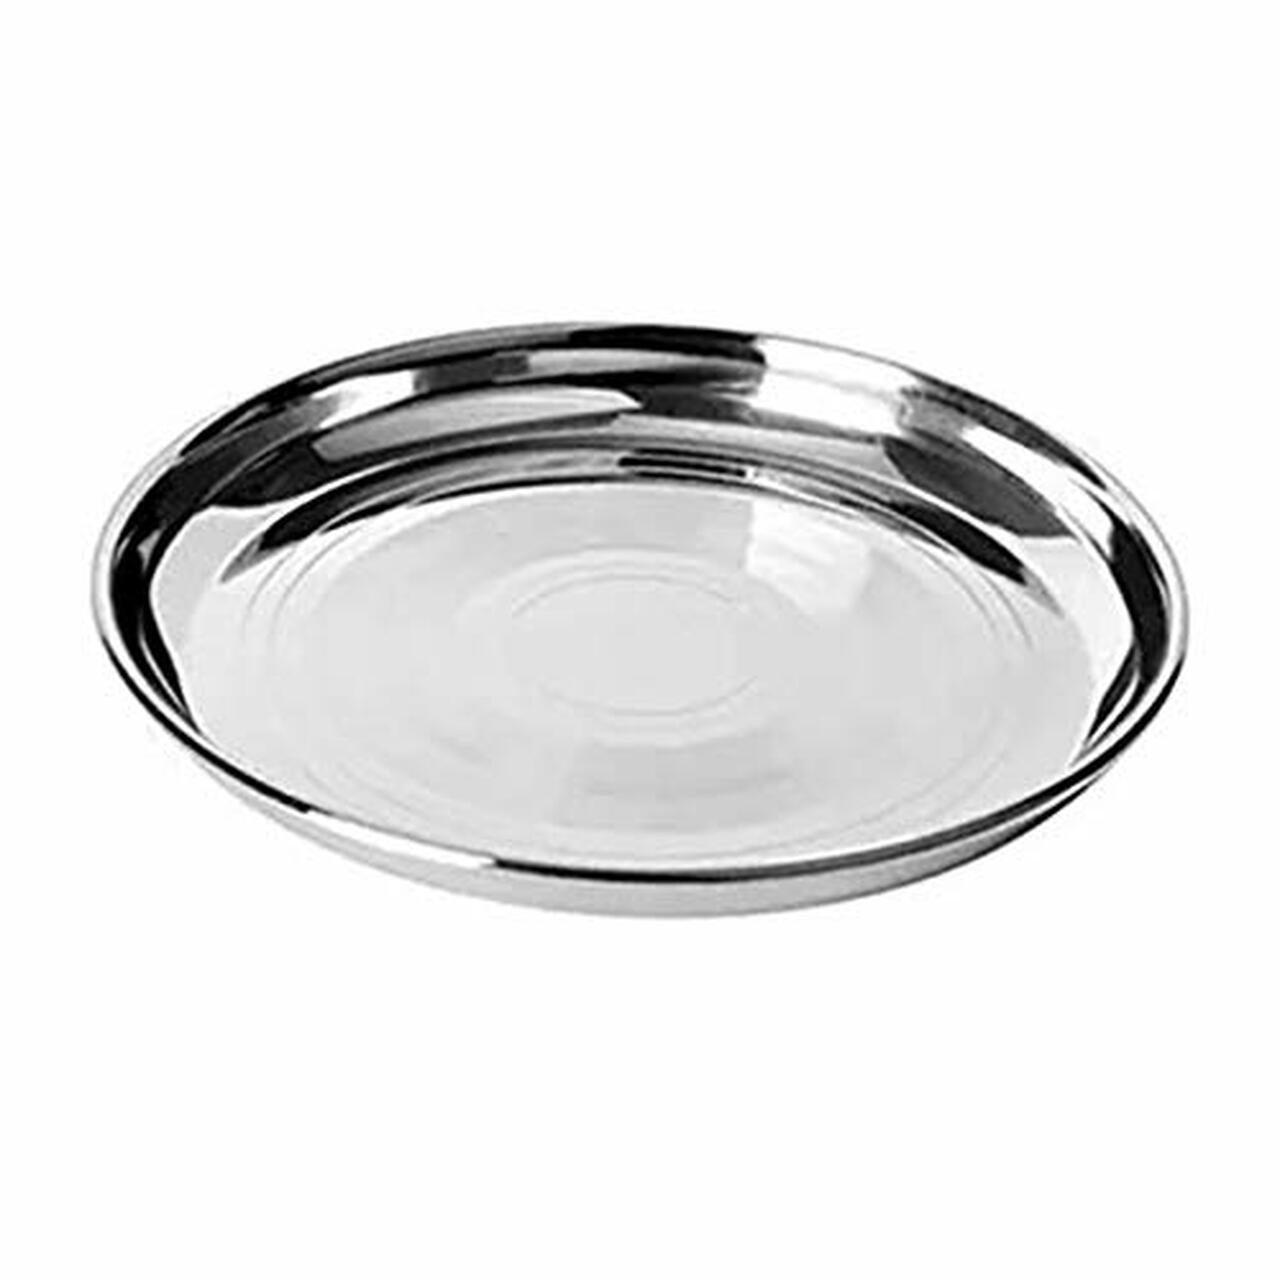 Stainless Steel Heavy Gauge Dinner Plate with Mirror Finish - www.indiancart.com.au - Plates - - Indian Cart